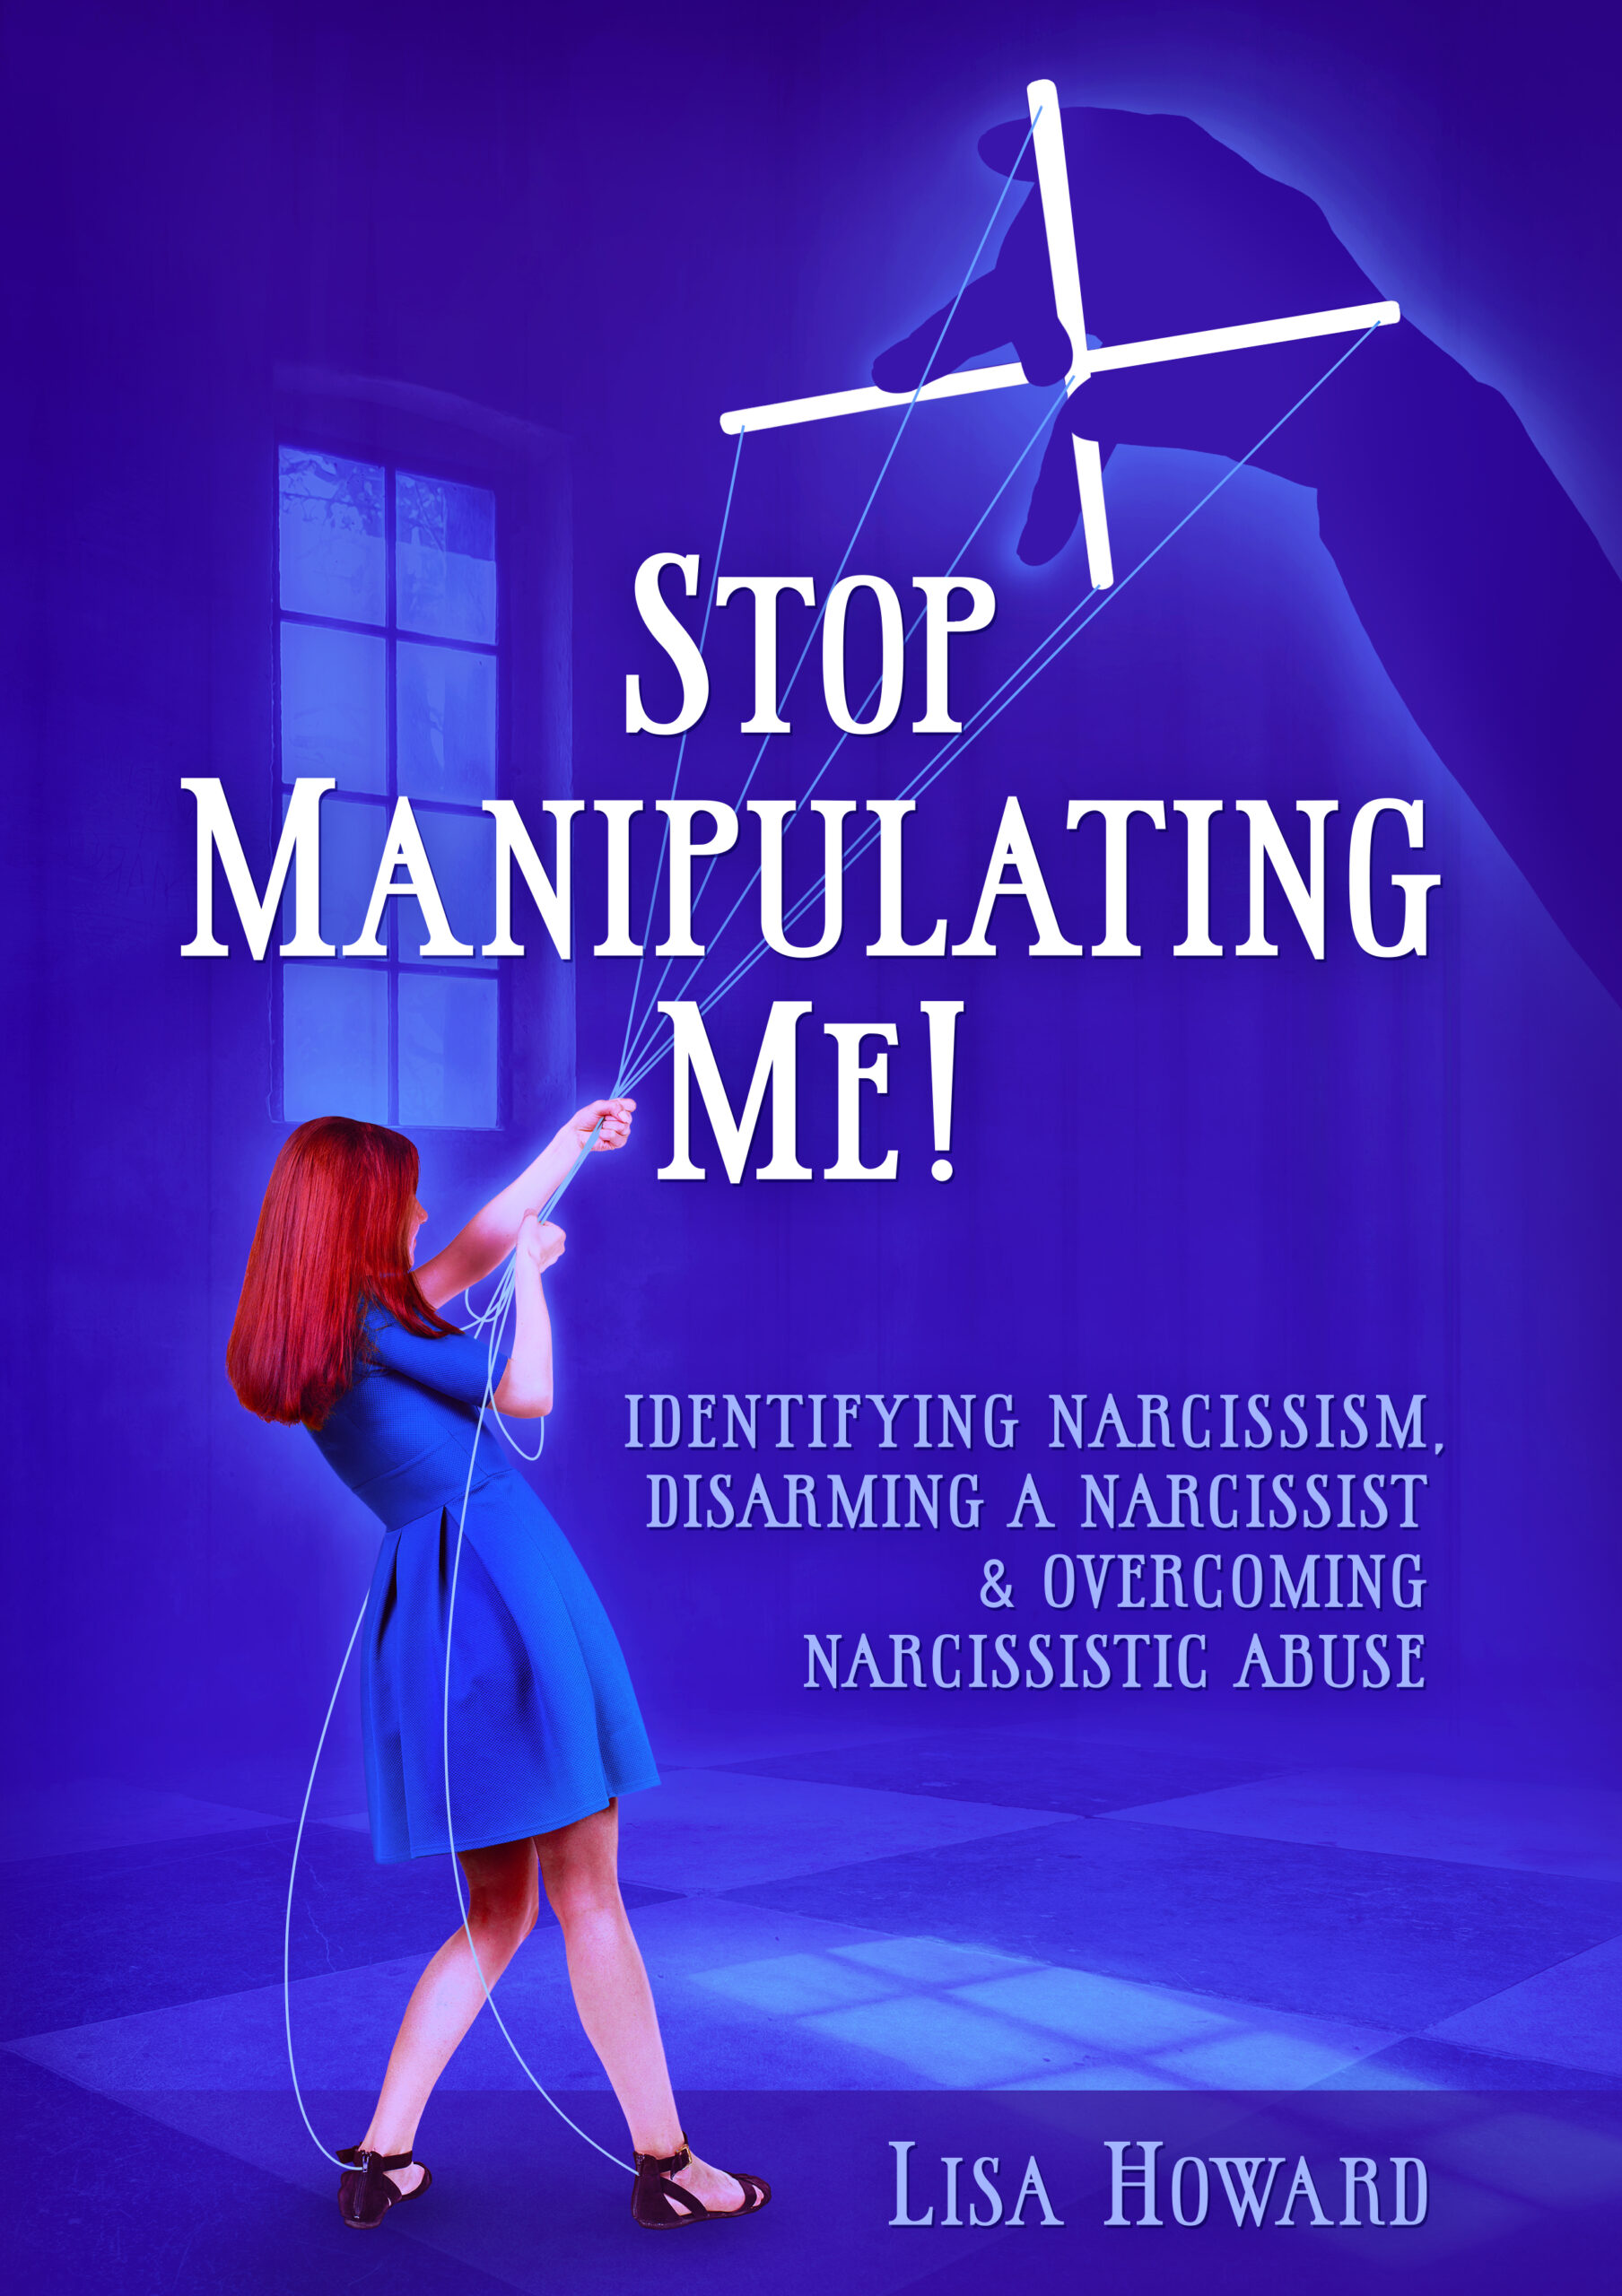 FREE: Stop Manipulating Me!: Identifying Narcissism, Disarming A Narcissist & Overcoming Narcissistic Abuse by Lisa Howard